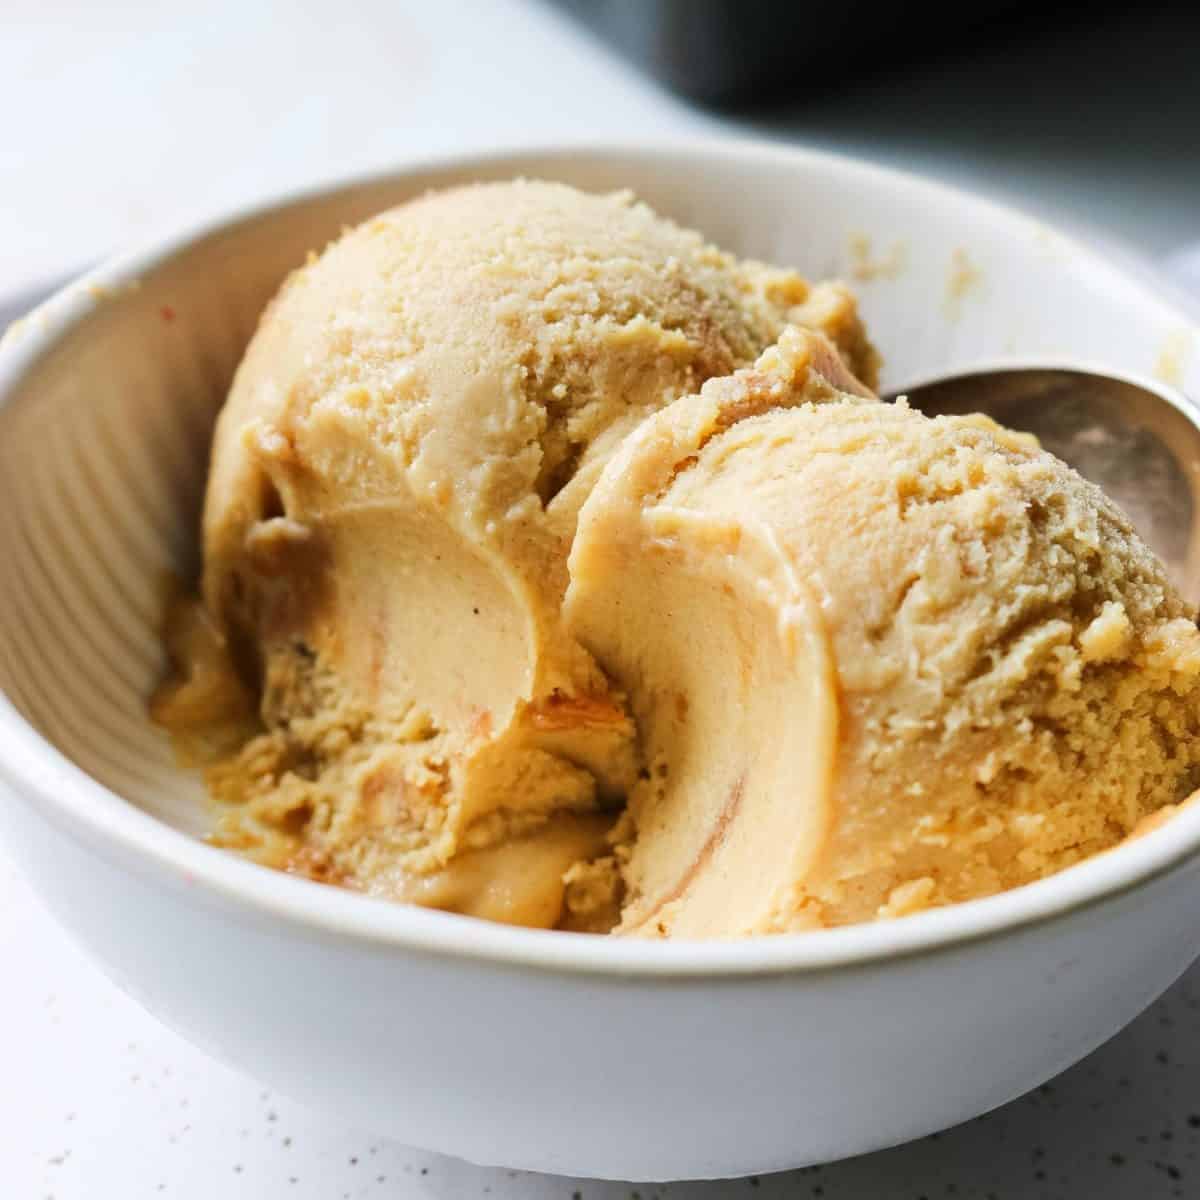 A bowl of peanut butter ice cream.